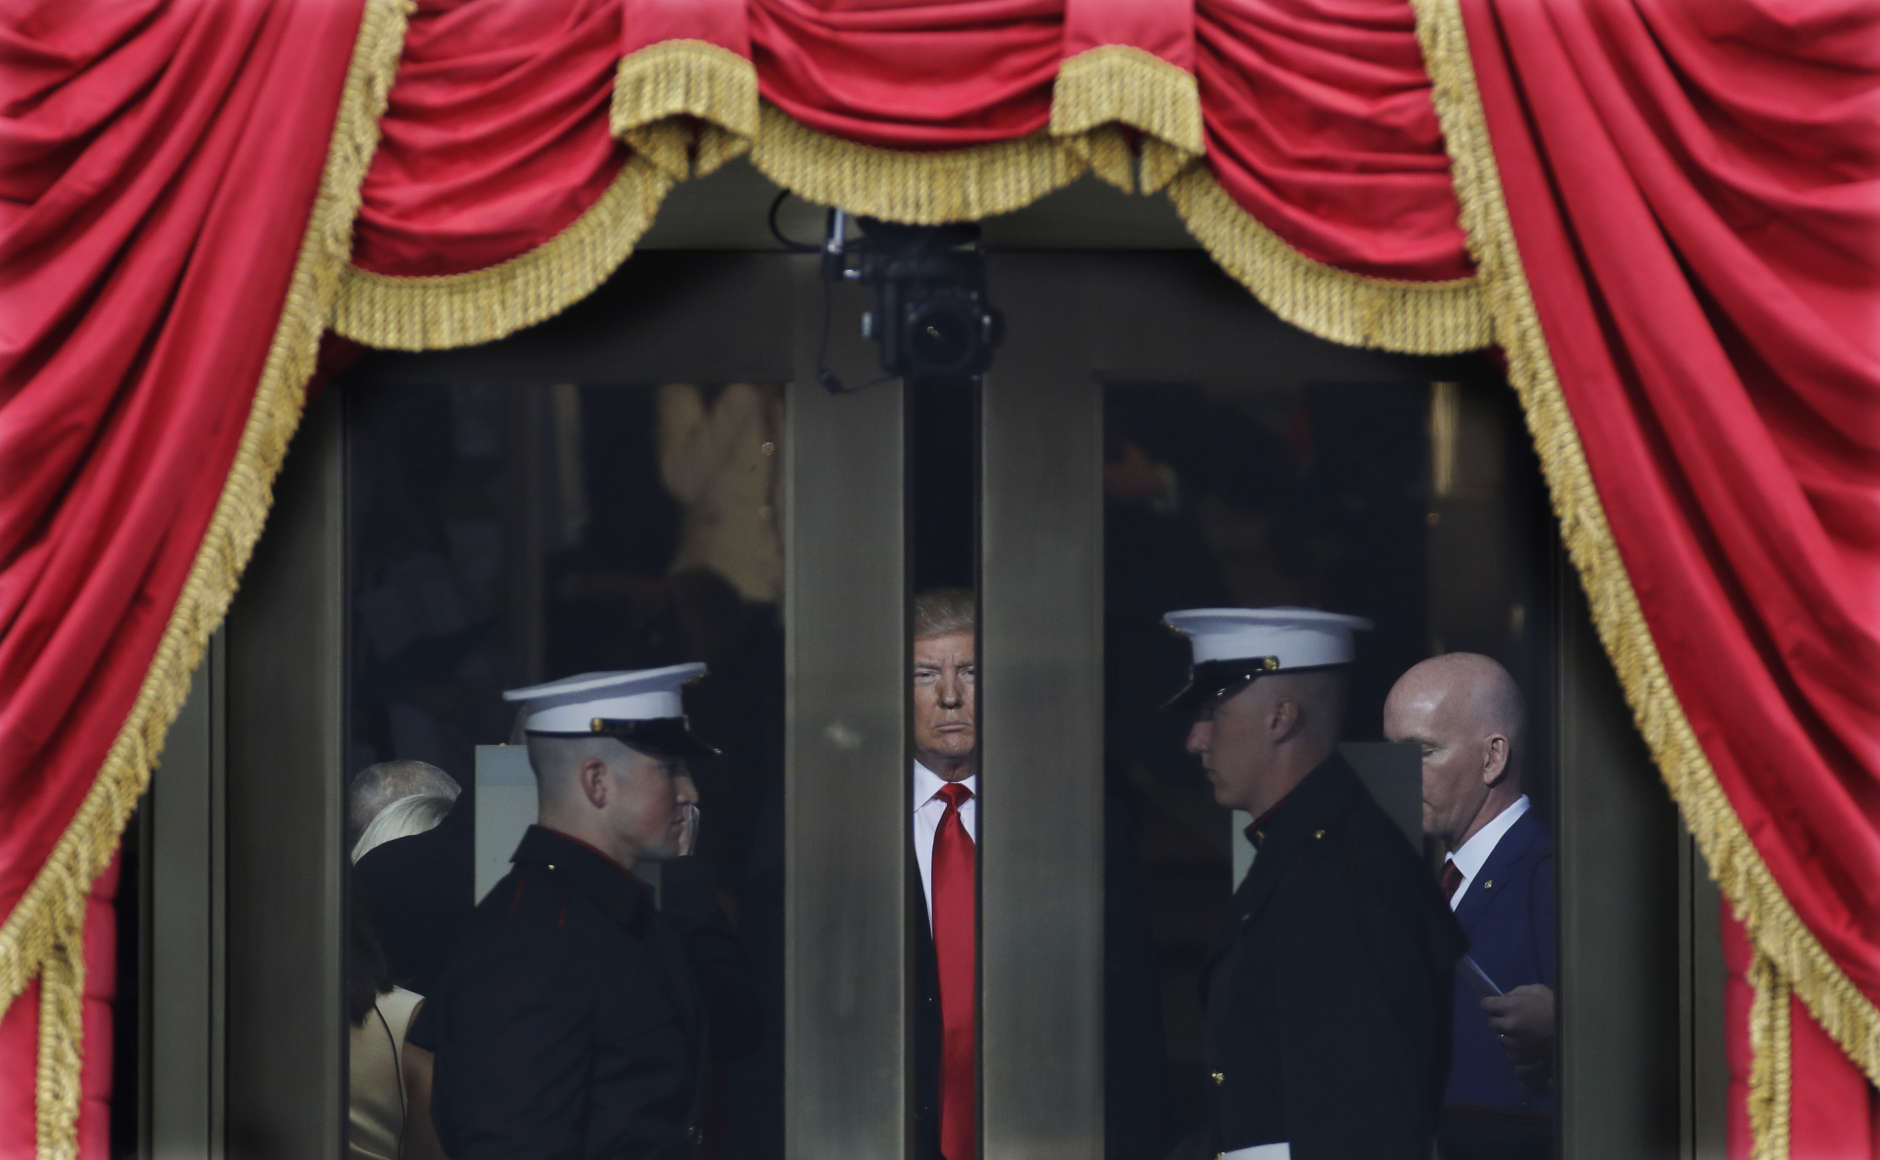 President-elect Donald Trump waits to stop out onto the portico for his Presidential Inauguration at the U.S. Capitol in Washington, Friday, Jan. 20, 2017. (AP Photo/Patrick Semansky)